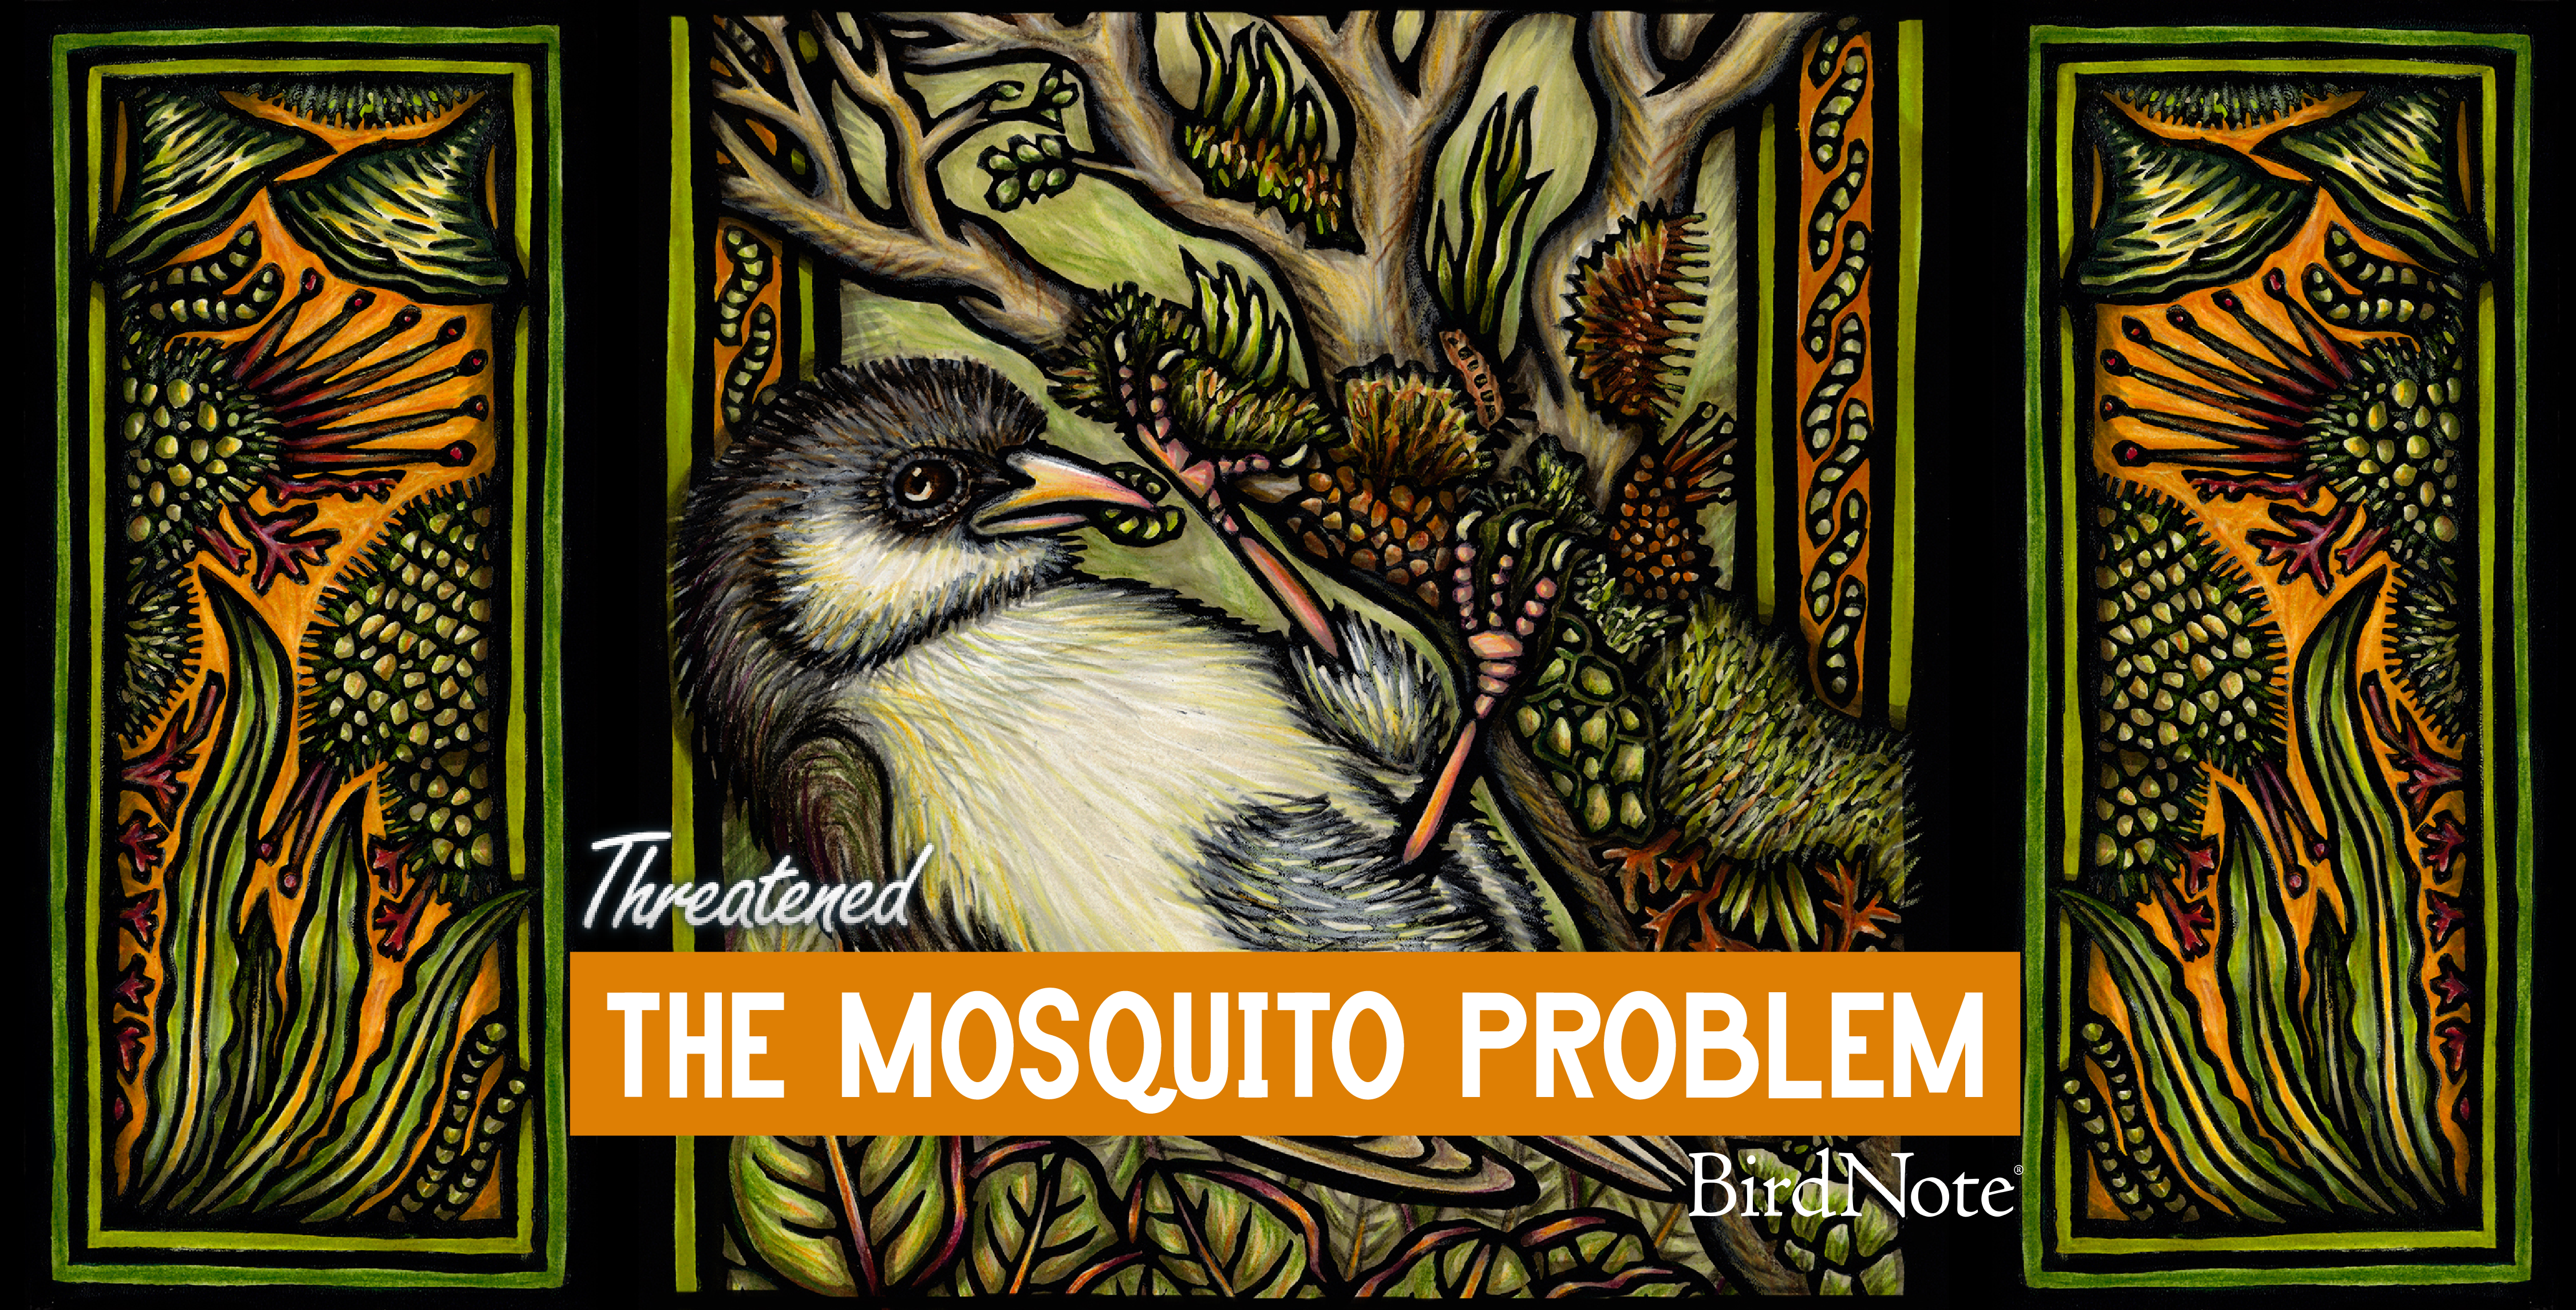 Episode artwork for the Threatened episode "The Mosquito Problem" by Caren Loebel-Fried